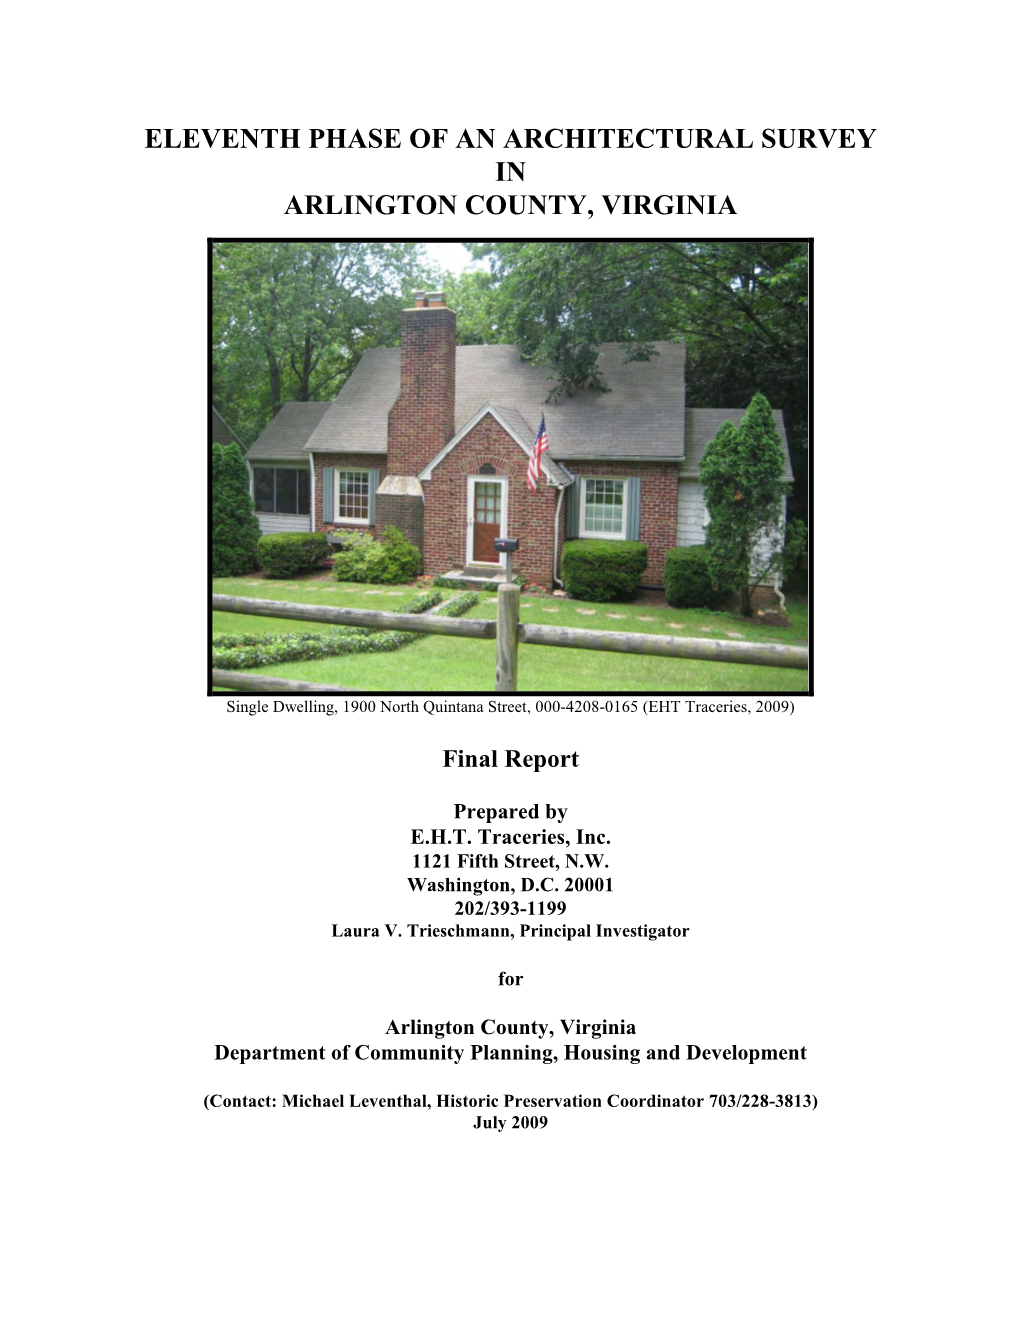 Eleventh Phase of an Architectural Survey in Arlington County, Virginia